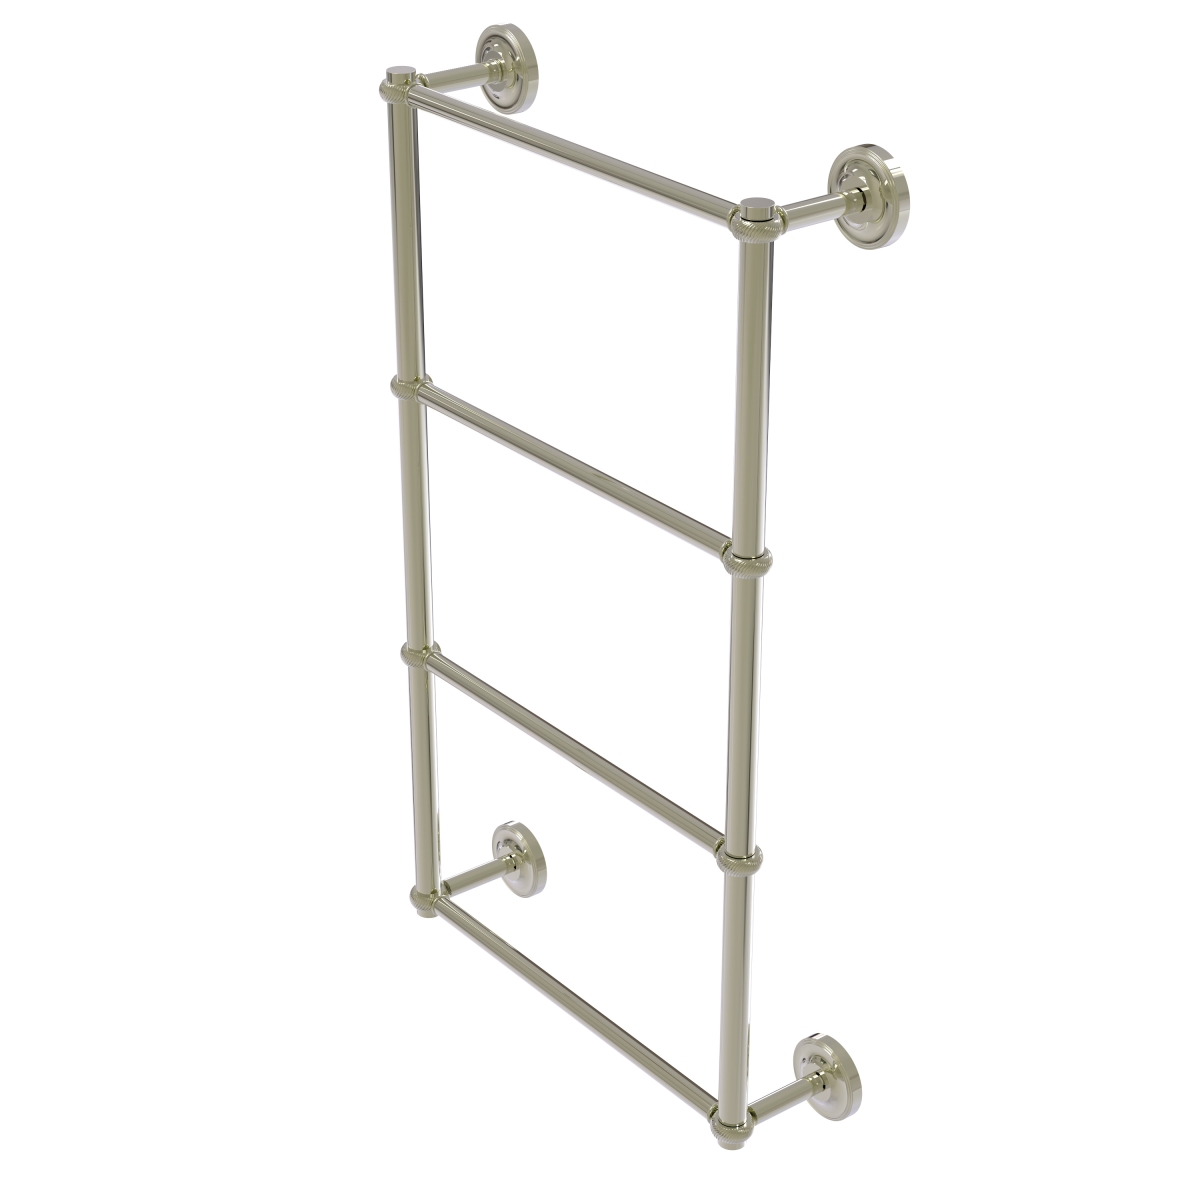 Allied Brass PR-28T-30-PNI 30 in. Prestige Regal Collection 4 Tier Ladder Towel Bar with Twisted, Polished Nickel